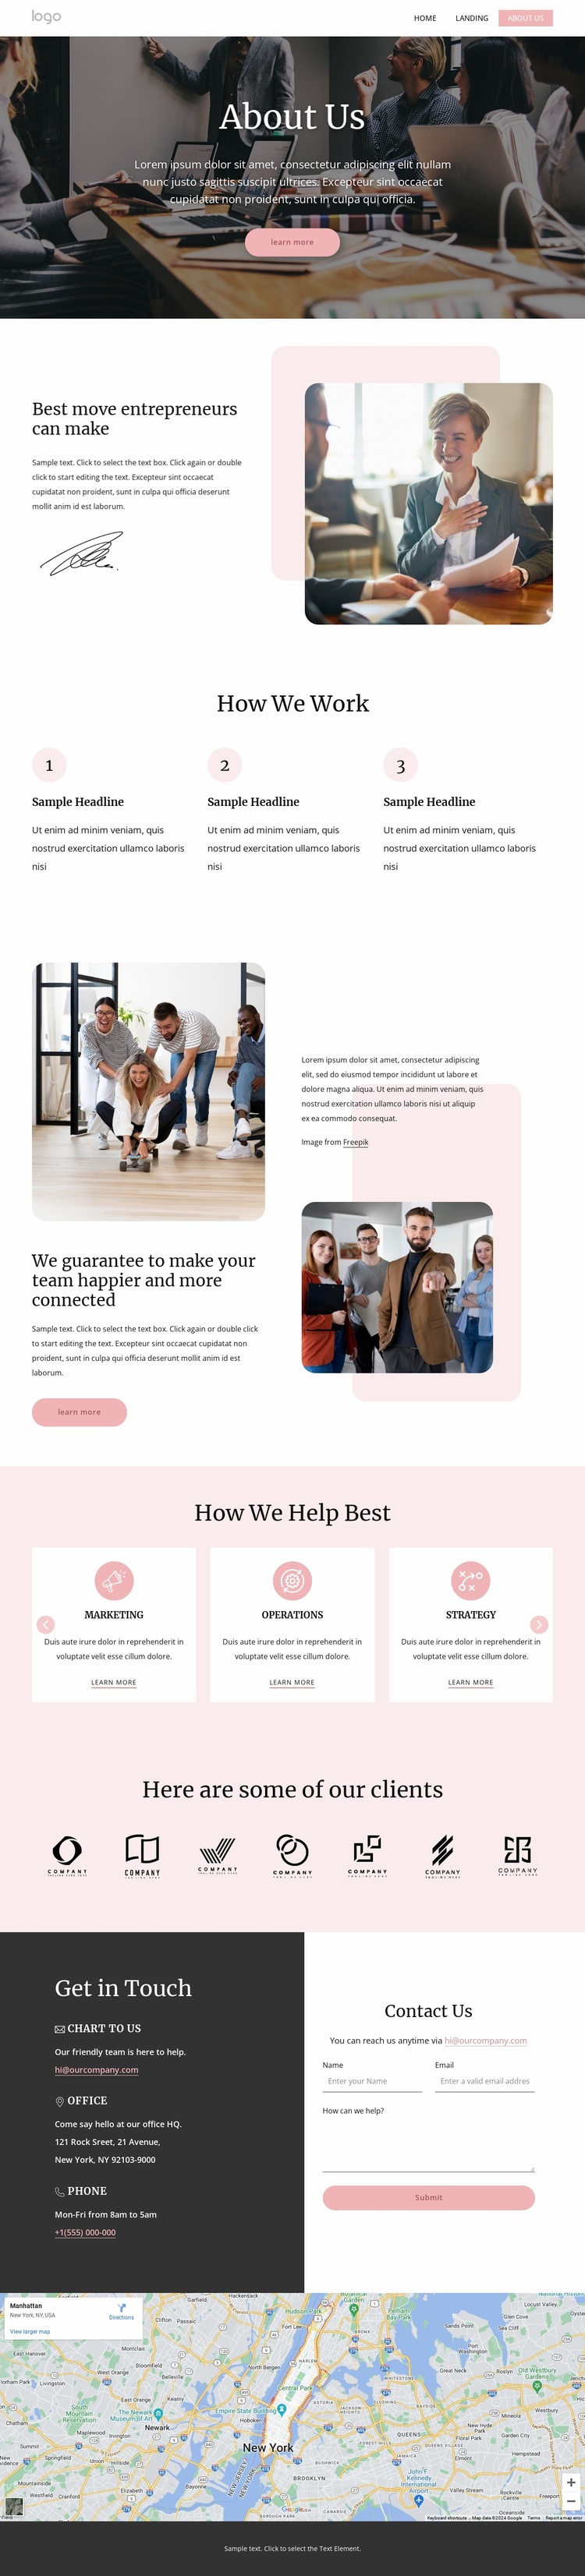 Team building expertise eCommerce Template